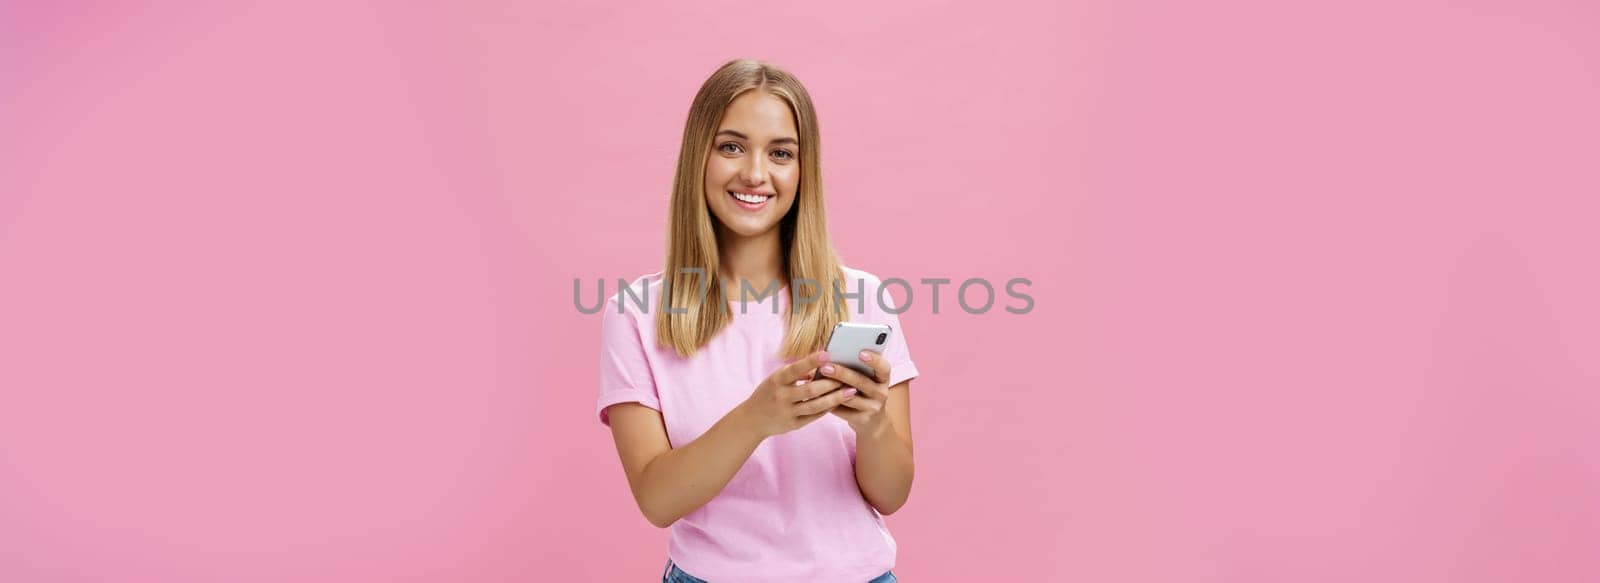 Woman calling taxy via smartphone asking friend address smiling cheerfully at camera holding phone with both hands over chest getting in touch with clients via messages standing over pink wall. Technology concept